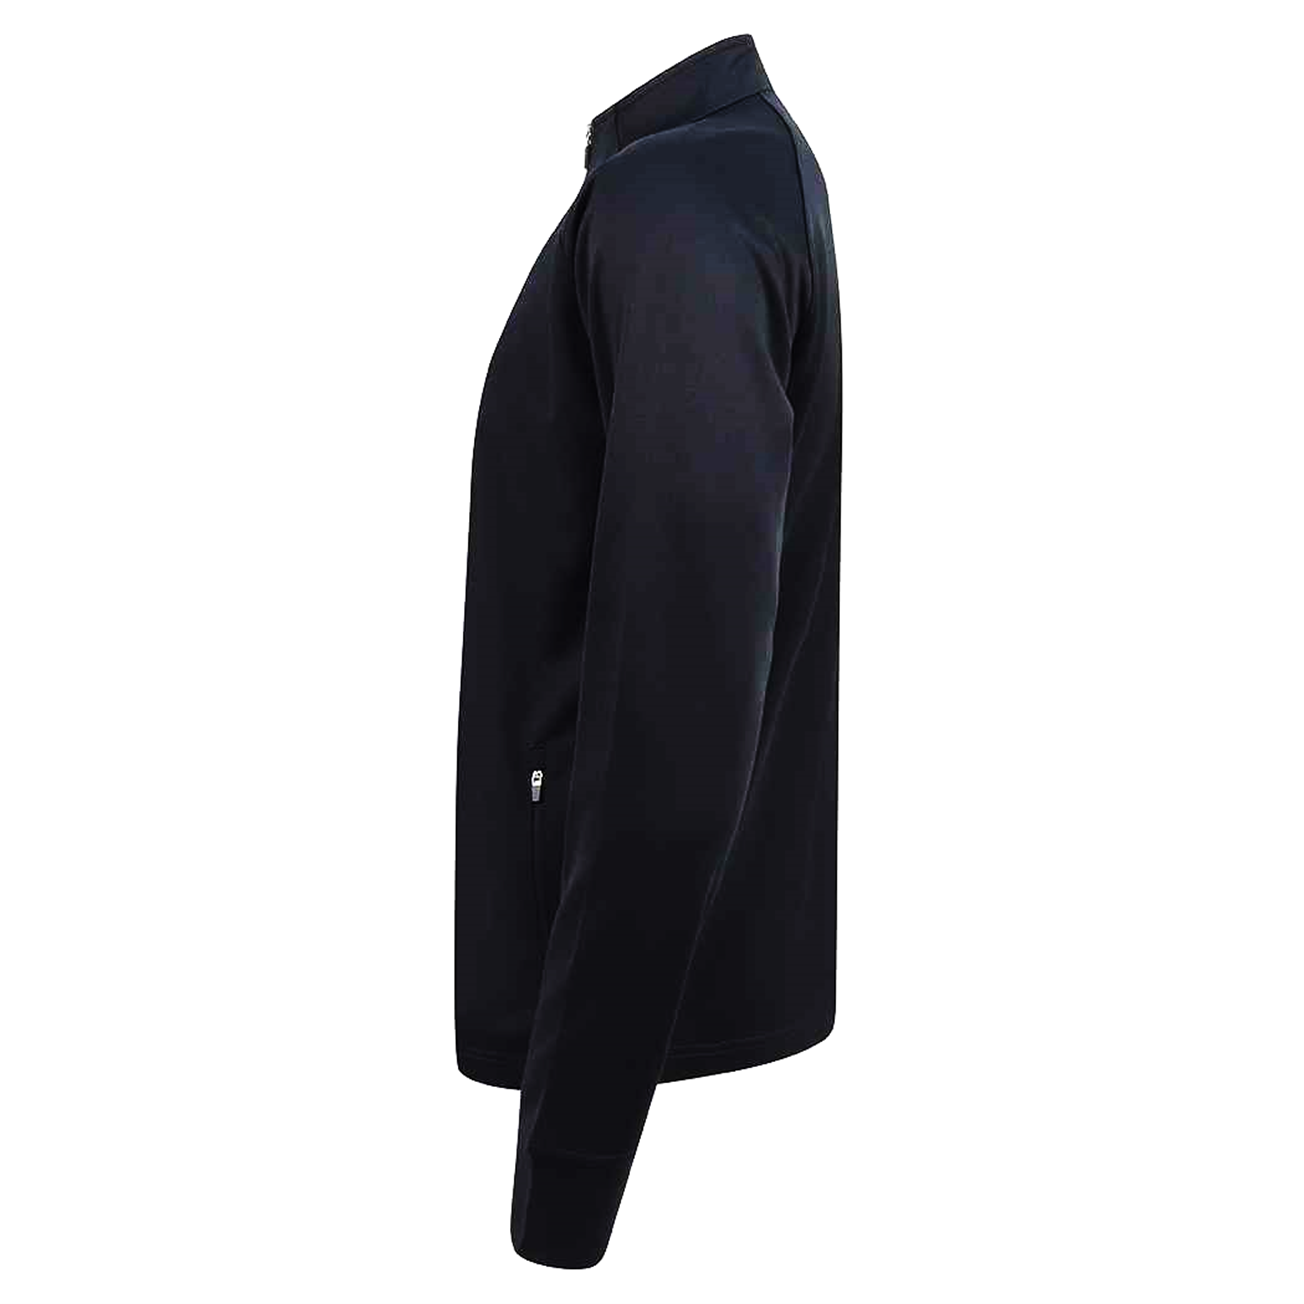 Dudley College Uniformed Services - Full Zip Jacket [LV871]